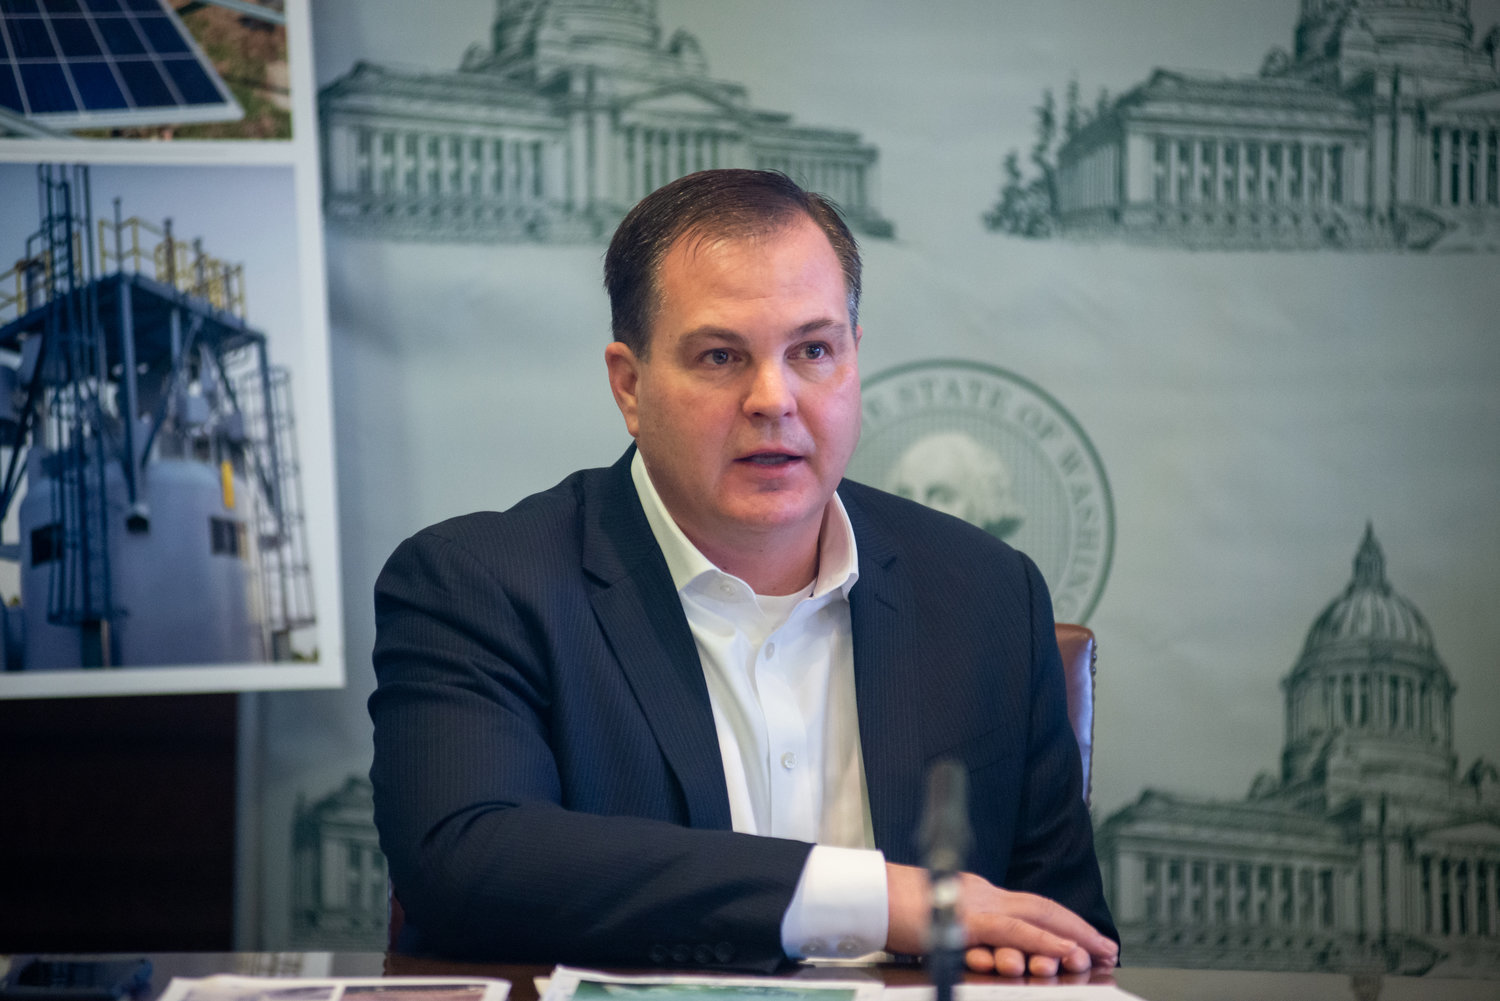 Sen. John Braun, of Centralia, serves the 20th Legislative District, which spans parts of four counties from Yelm to Vancouver. He became Senate Republican leader in 2020. 